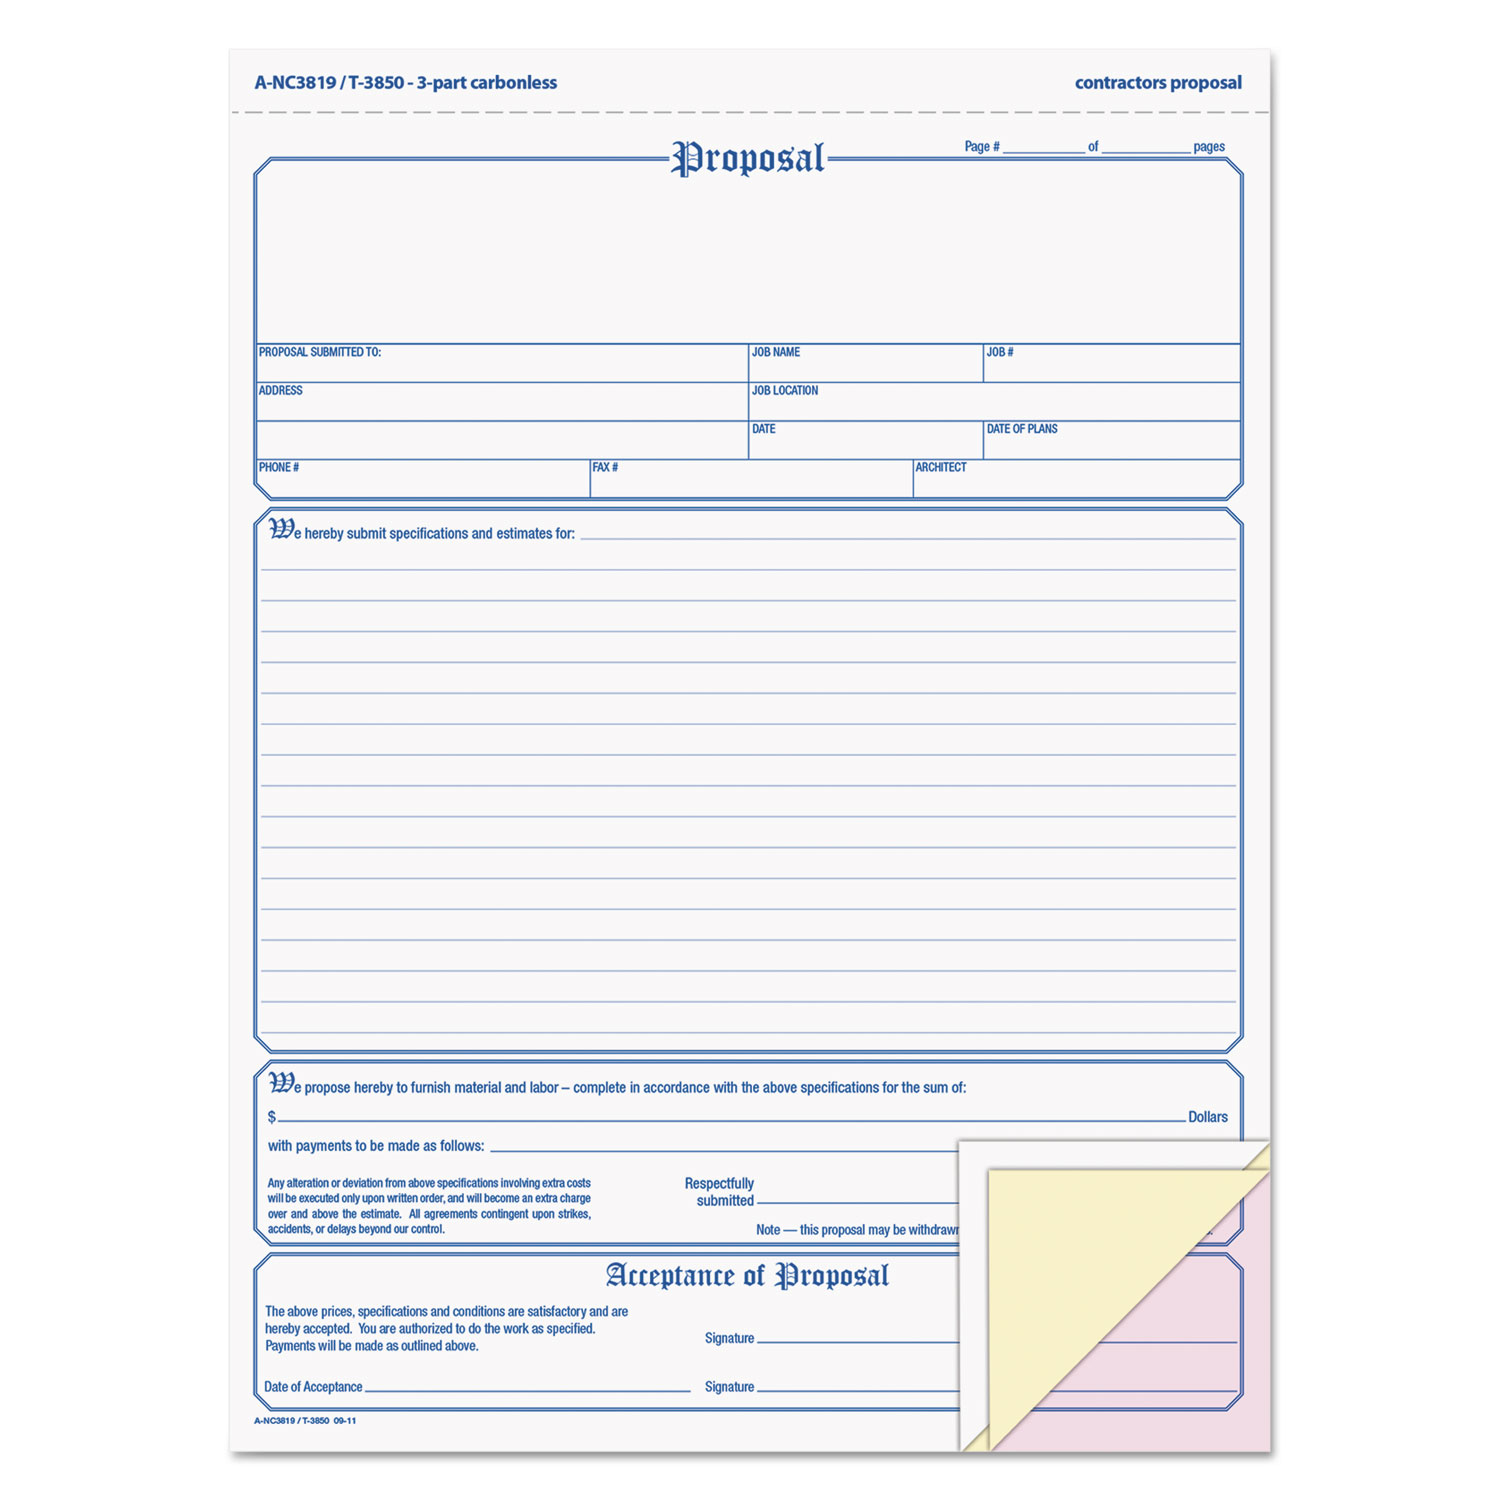 Proposal Form, 8-1/2 x 11, Three-Part Carbonless, 50 Forms